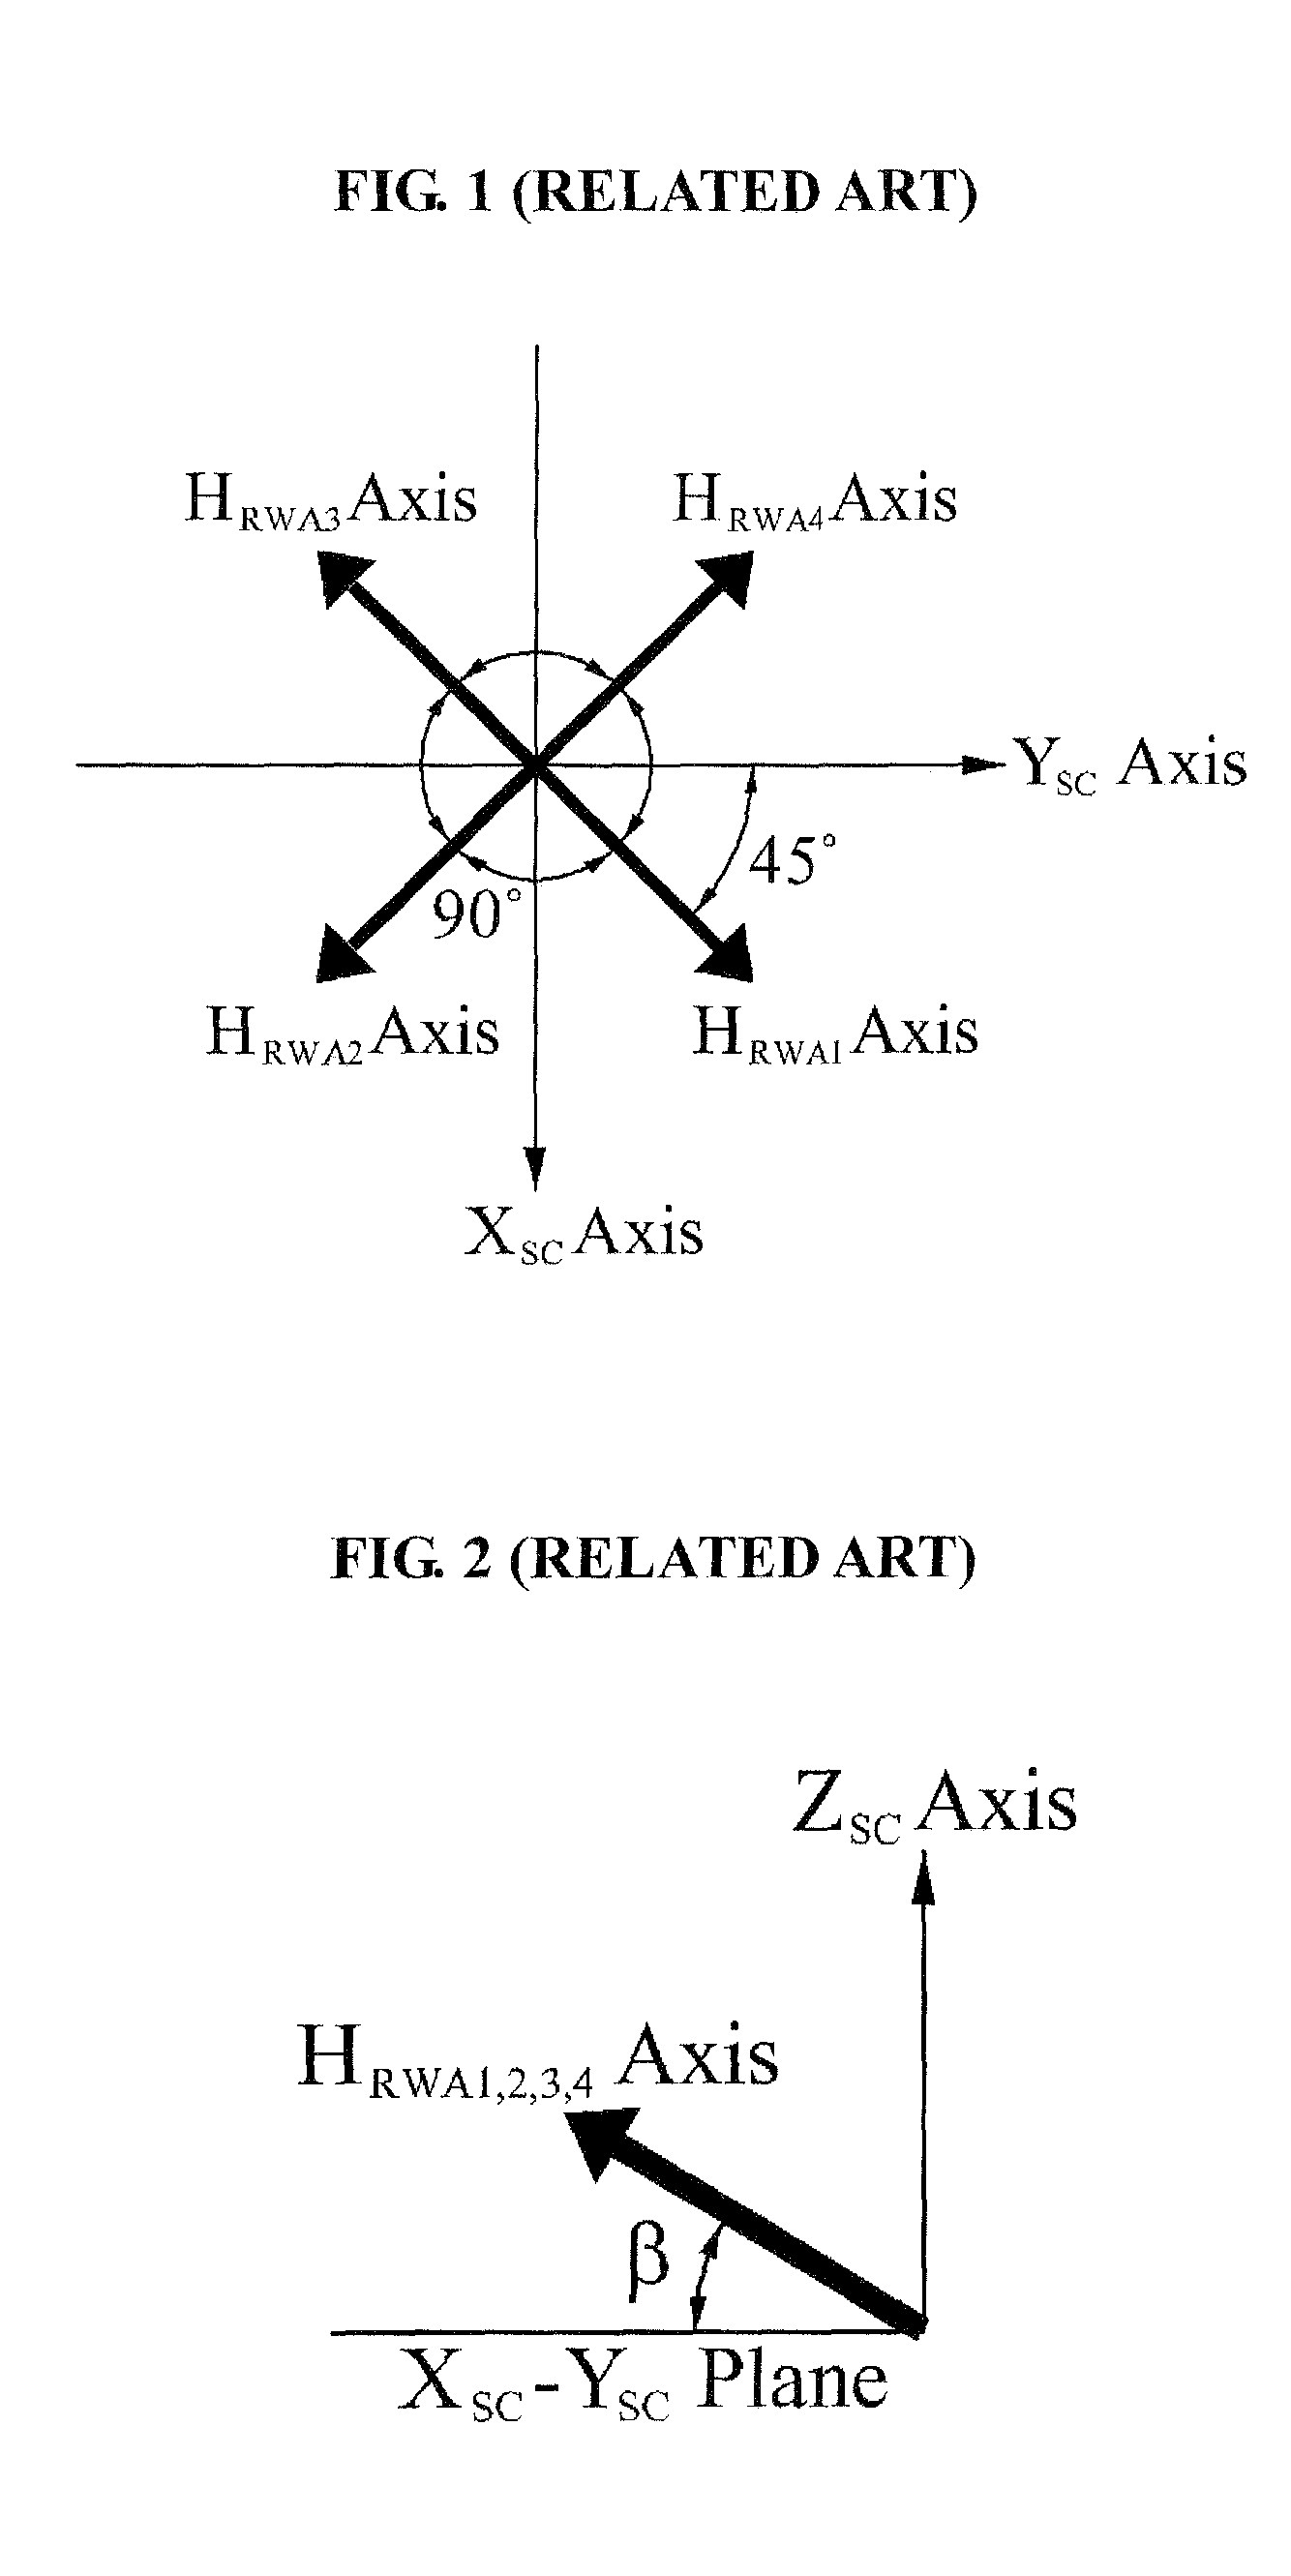 Method for improving maneuverability and controllability by simultaneously applying both reaction wheel-based attitude controller and thruster-based attitude controller